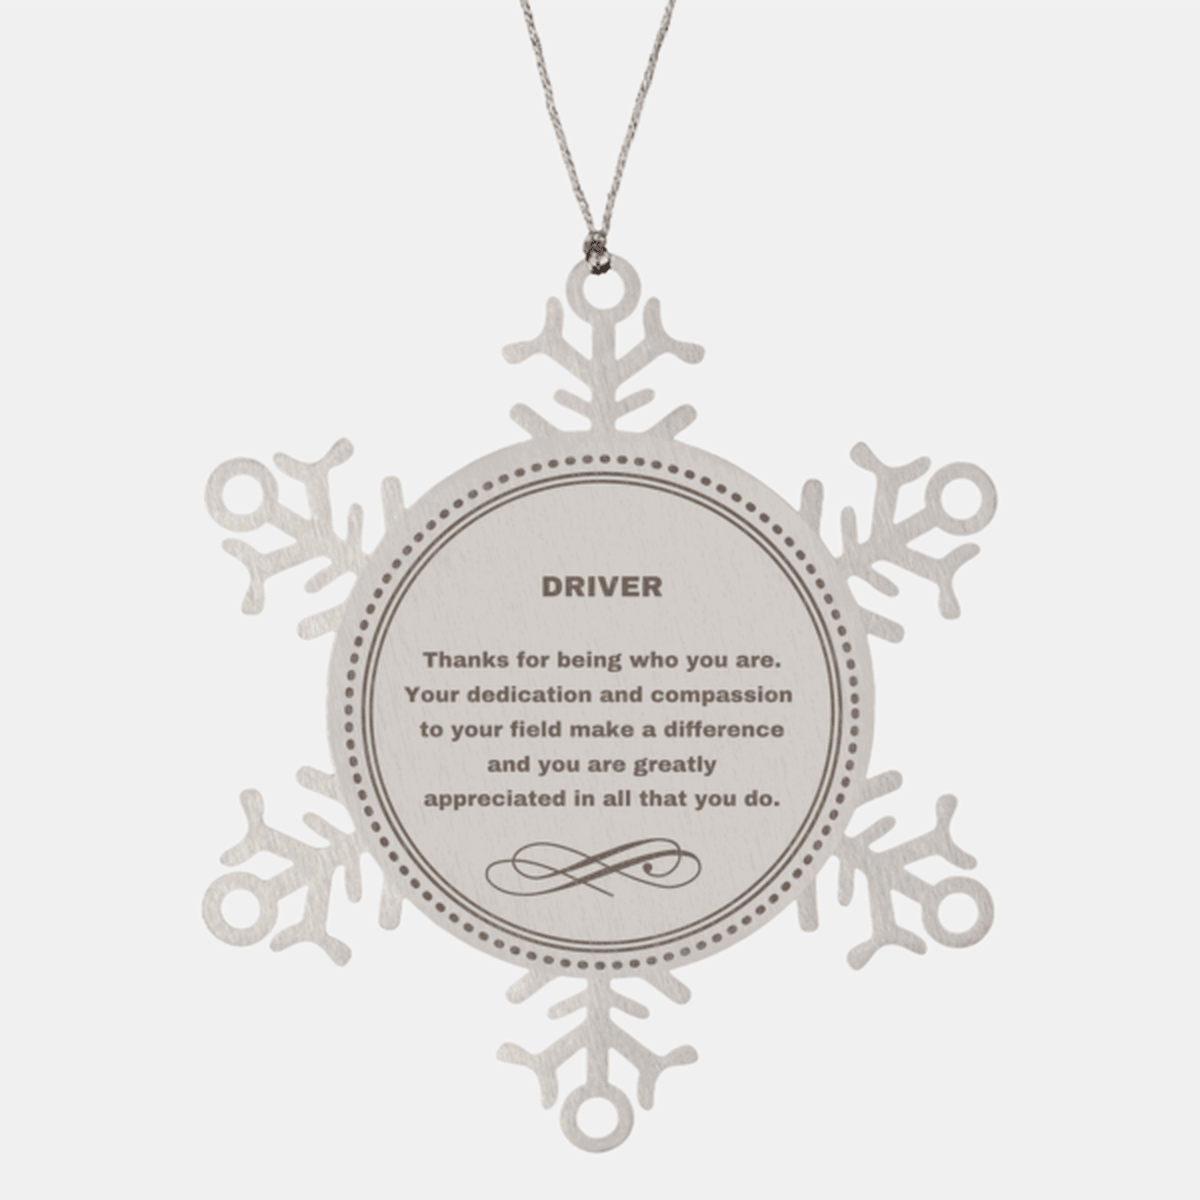 Driver Snowflake Ornament - Thanks for being who you are - Birthday Christmas Jewelry Gifts Coworkers Colleague Boss - Mallard Moon Gift Shop